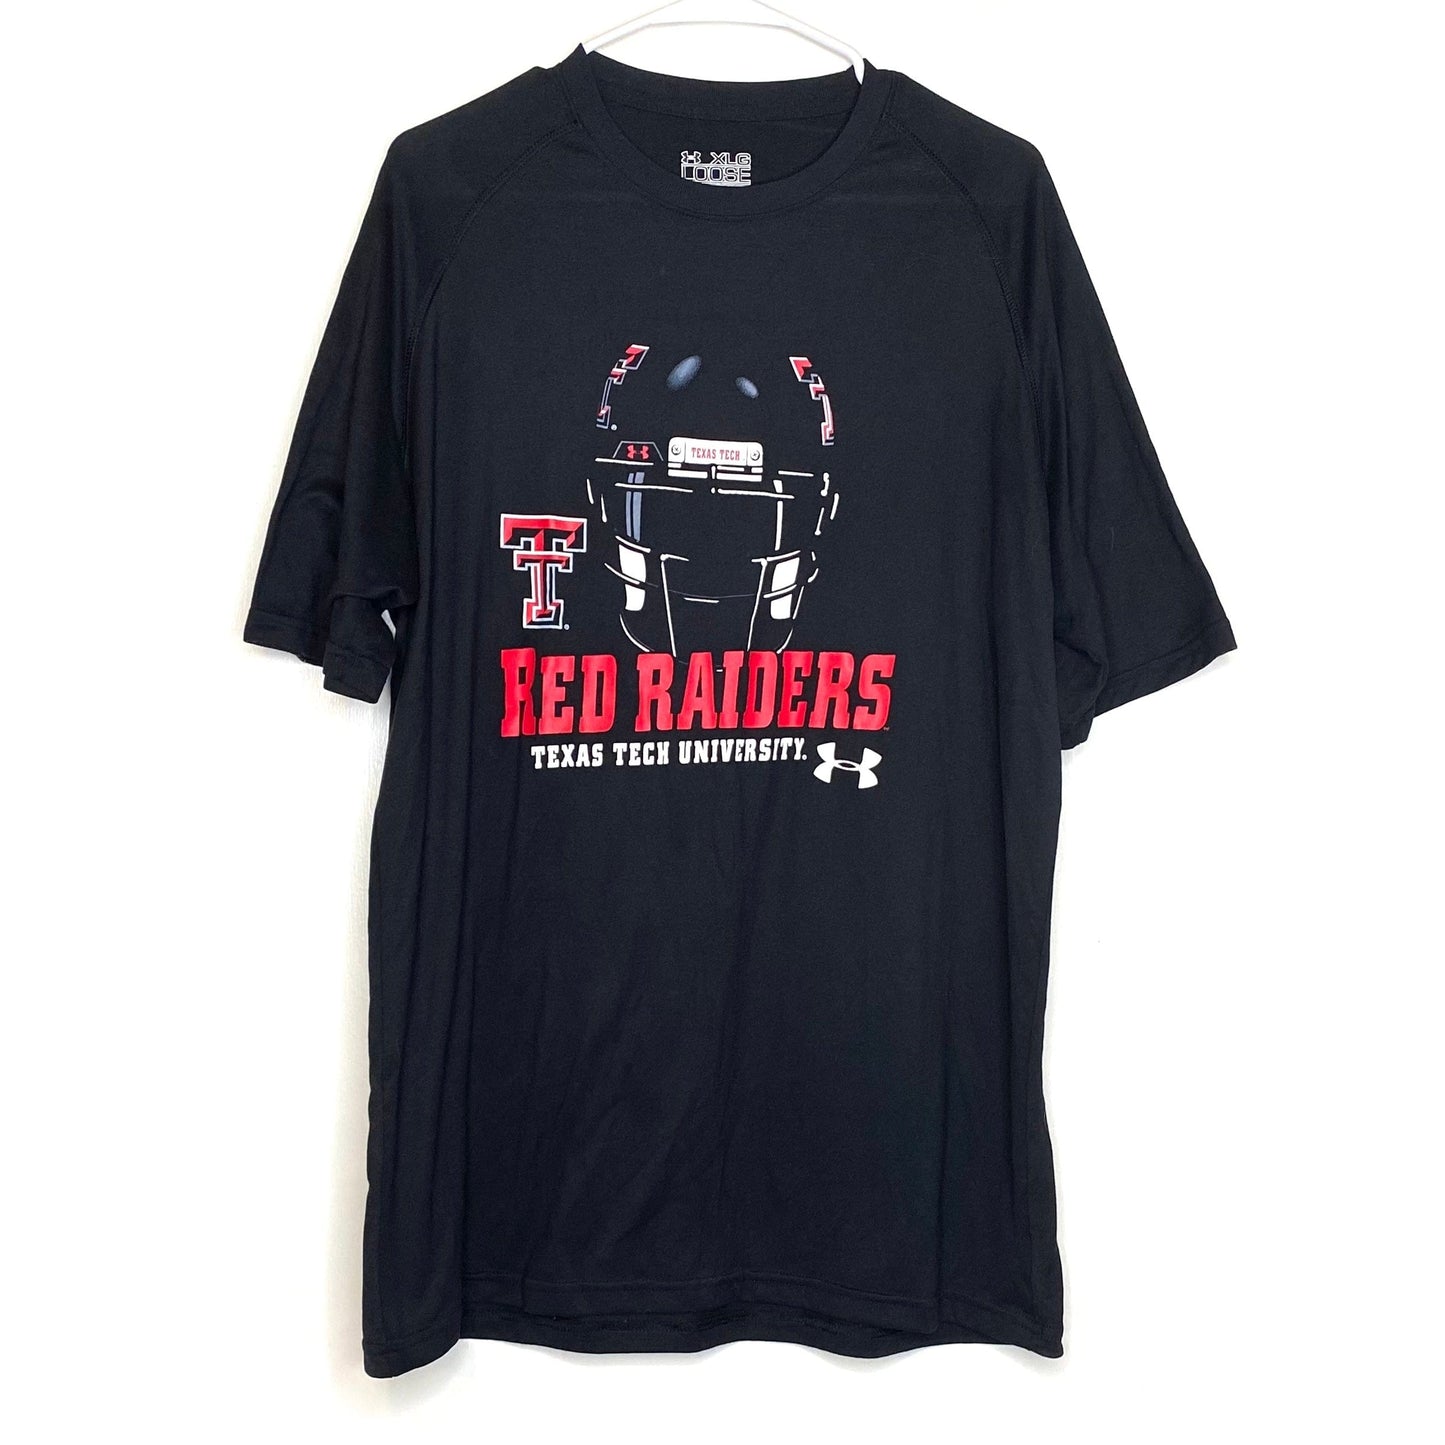 Under Armour Mens Size XL Loose Texas Tech Red Raiders Football T-Shirt S/s Pre-Owned